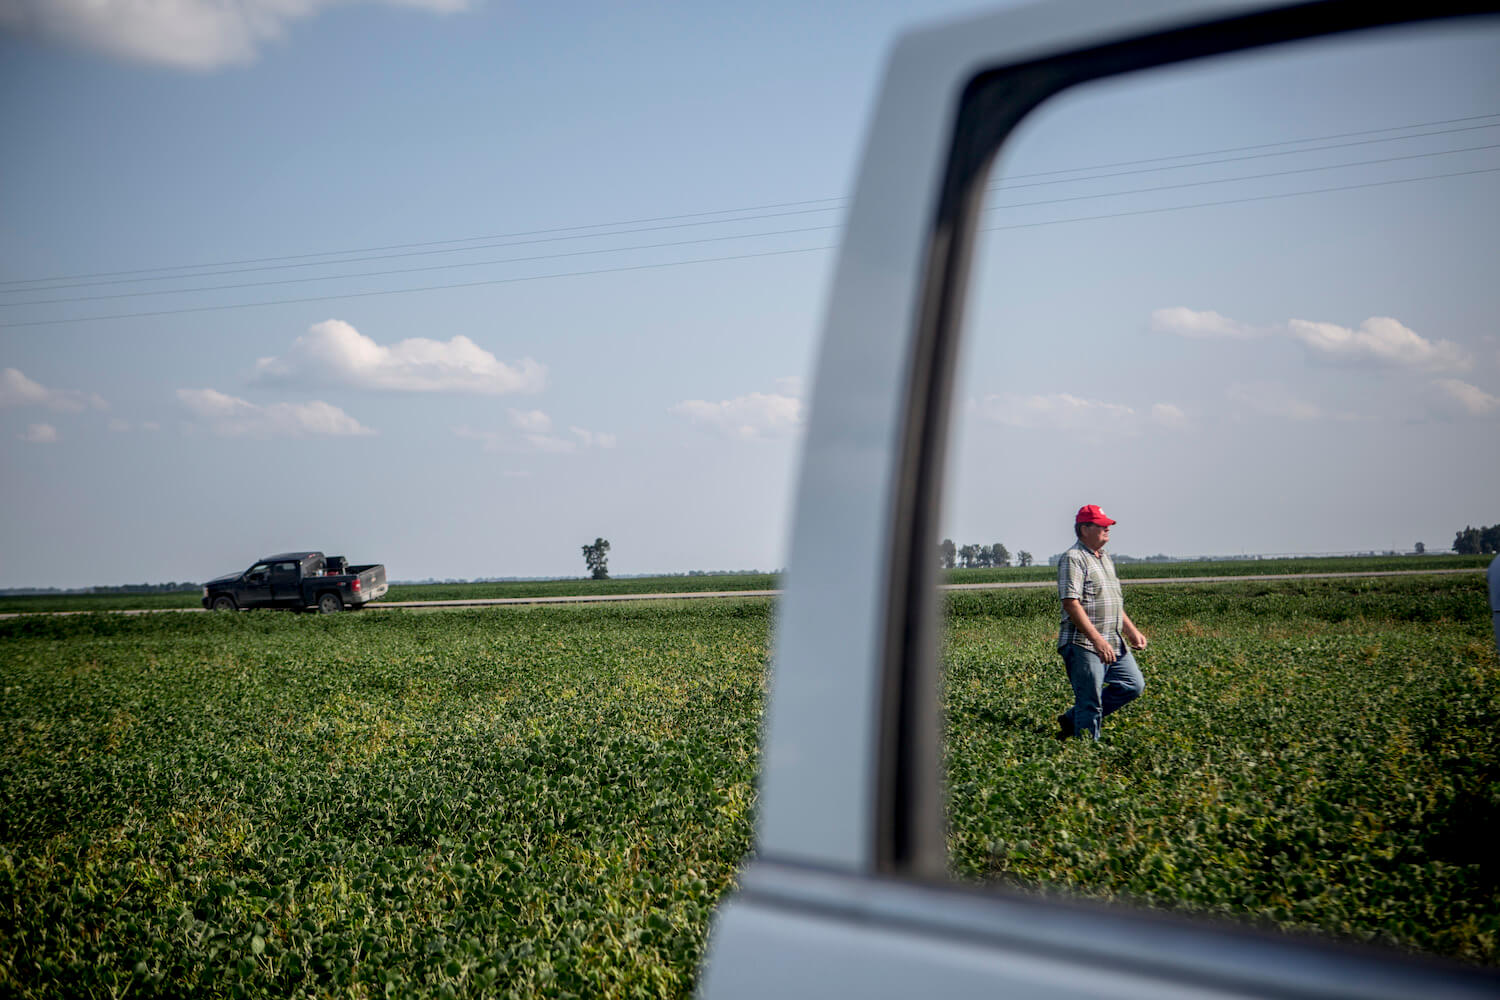 August 9, 2017: Lyle Hadden, a soybean farmer, walks through a field he's planted that shows signs of being affected by Dicamba. Dicamba, a weed killer that has been used for over 50 years, is now having a devastating impact in Arkansas and neighboring states because because the Monsanto is now selling new soybean and cotton varieties that have been genetically altered to tolerate Dicamba. While Arkansas voted to put a ban in place, farmers continue finding fields bearing the effects of the herbicide. April 2021